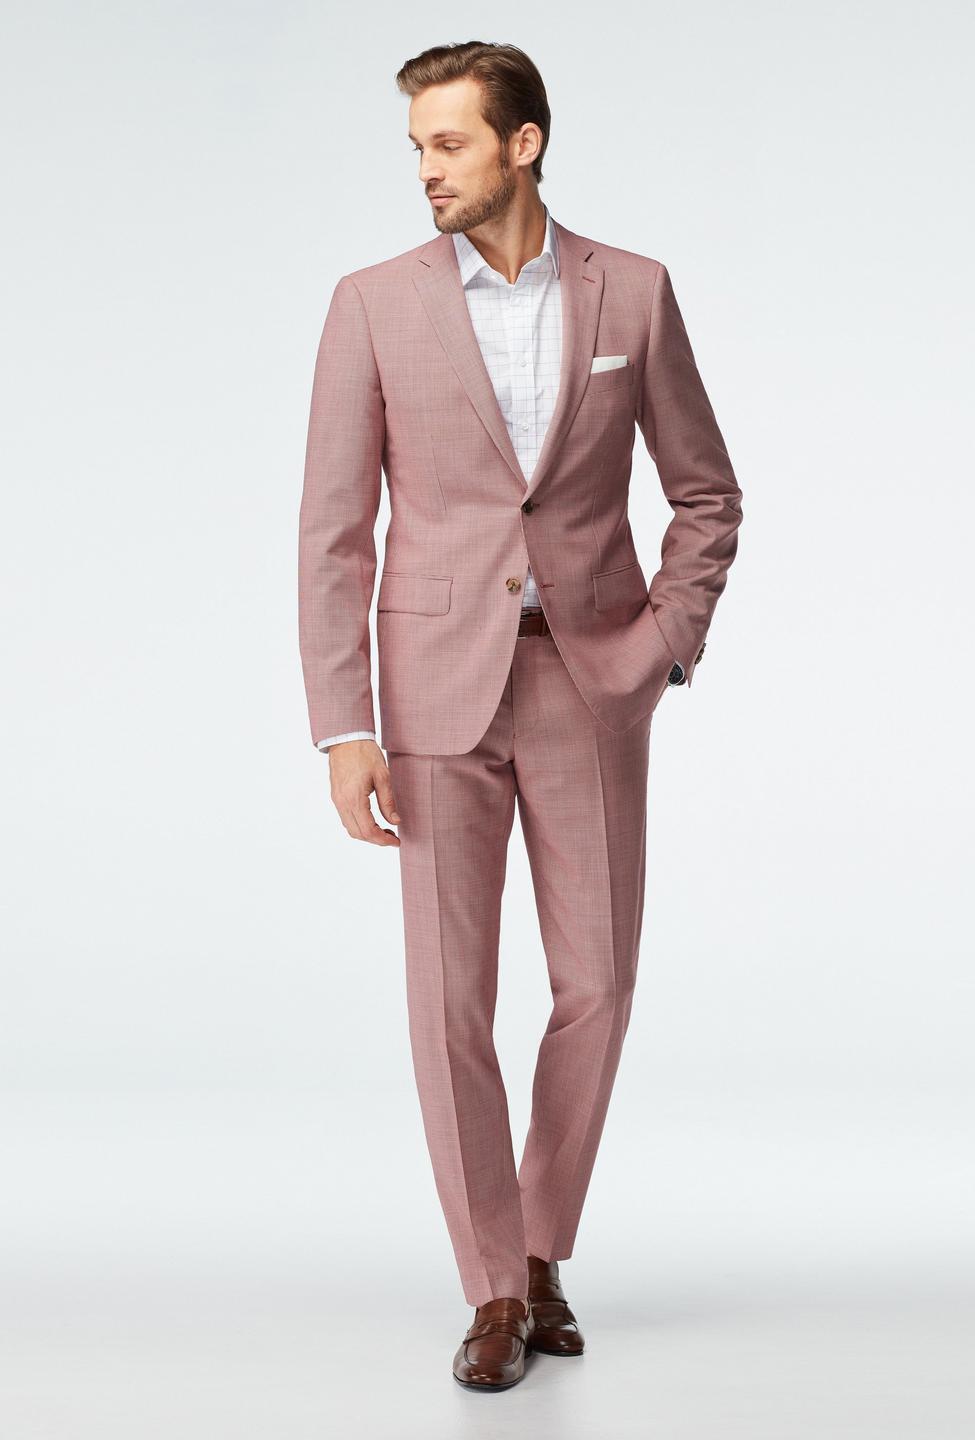 21 On-Trend Summer Wedding Suits For Every Dress Code